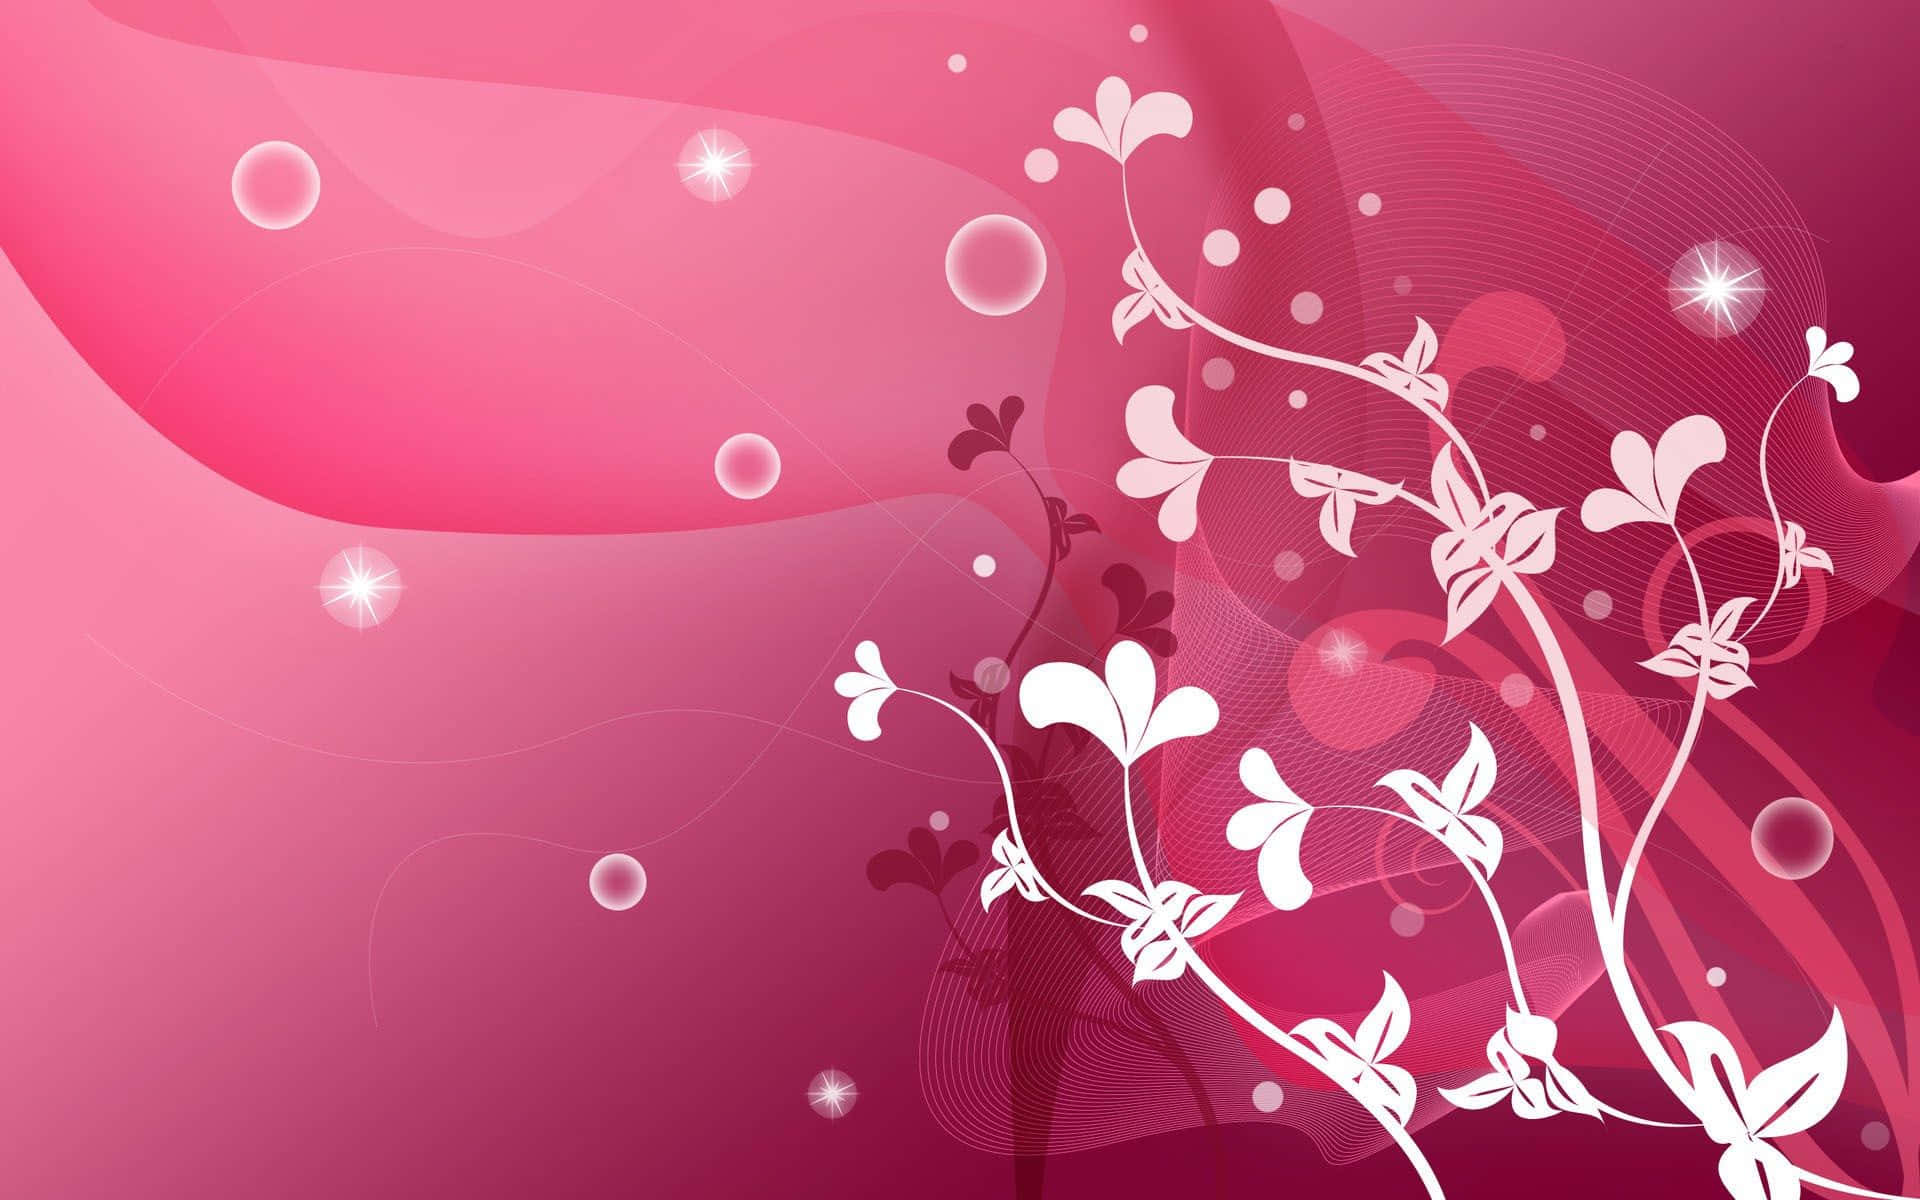 An abstract pink background, featuring a pleasingly textured effect